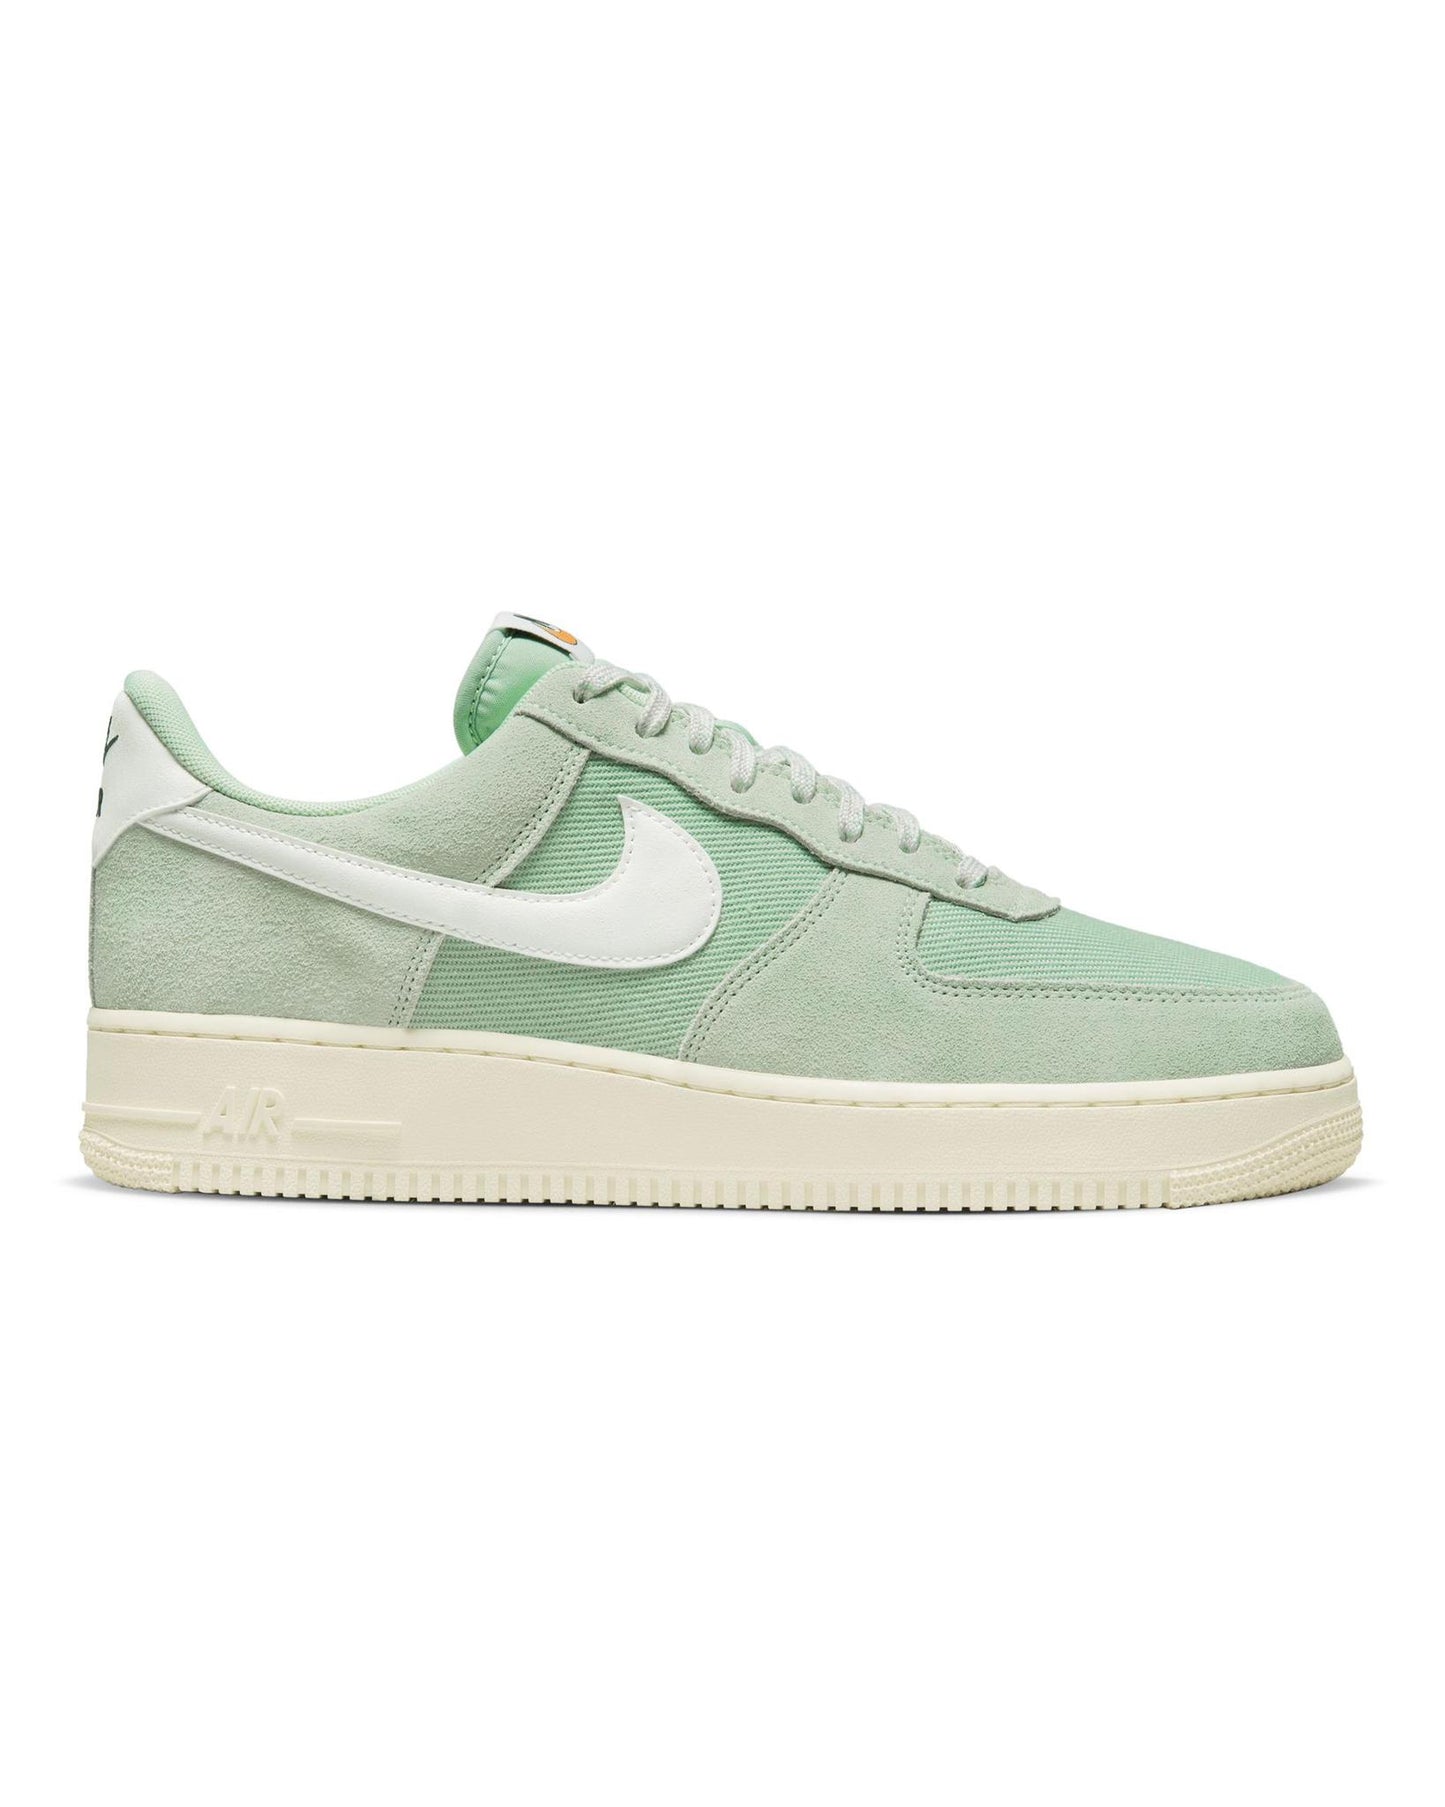 Nike Men's Air Force 1 '07 LV8 Certified Fresh Casual Shoes